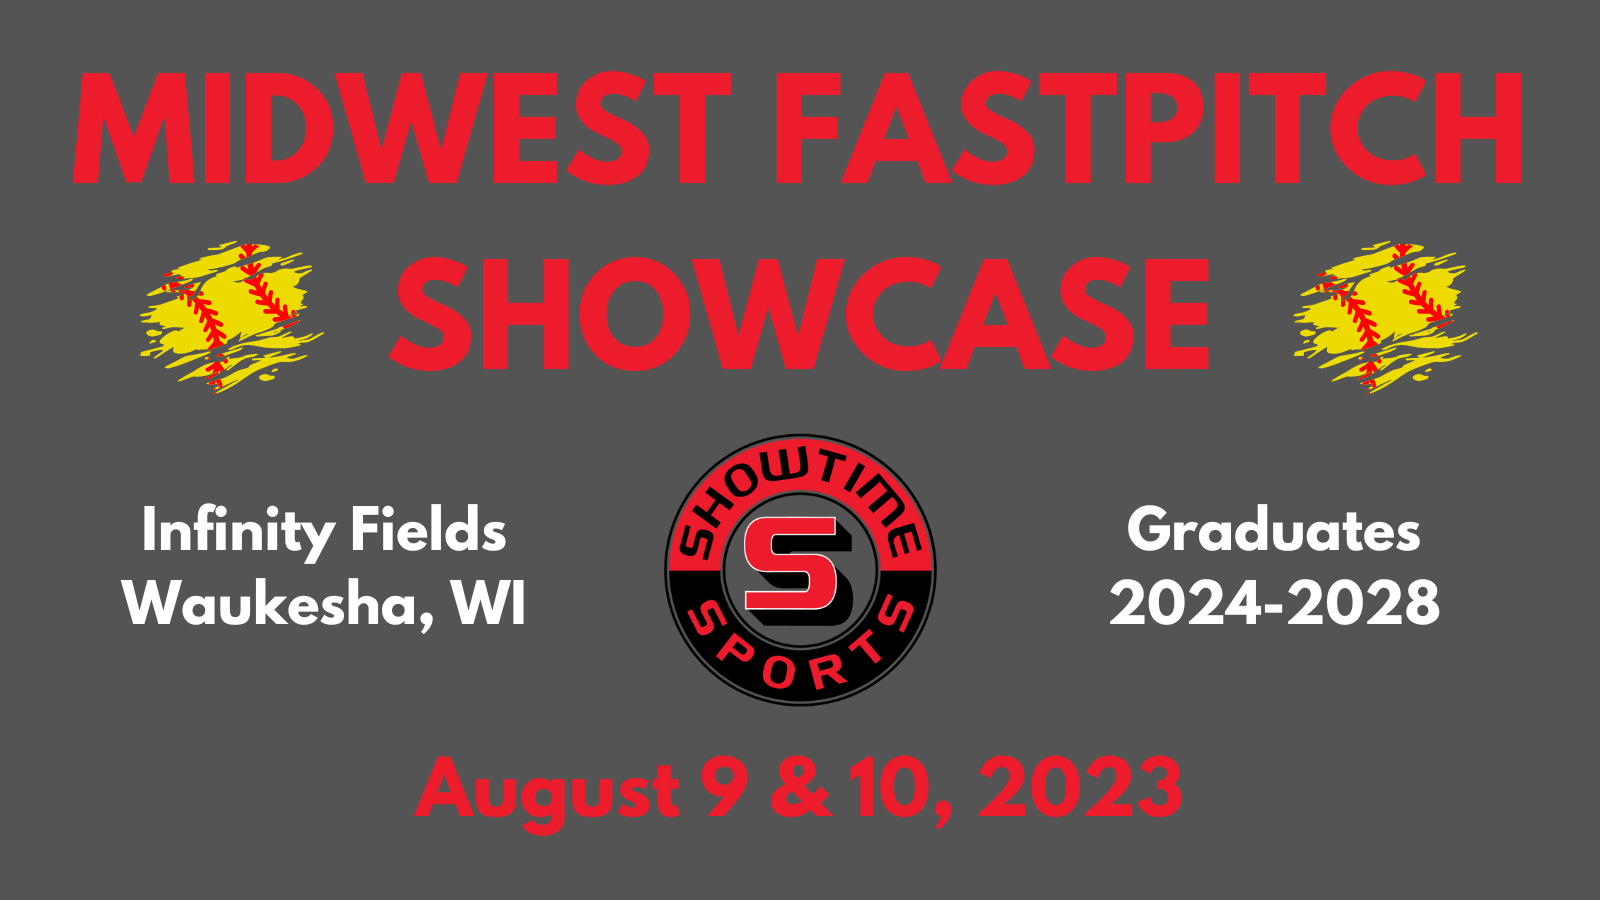 Midwest Fastpitch 2023 full sized banner